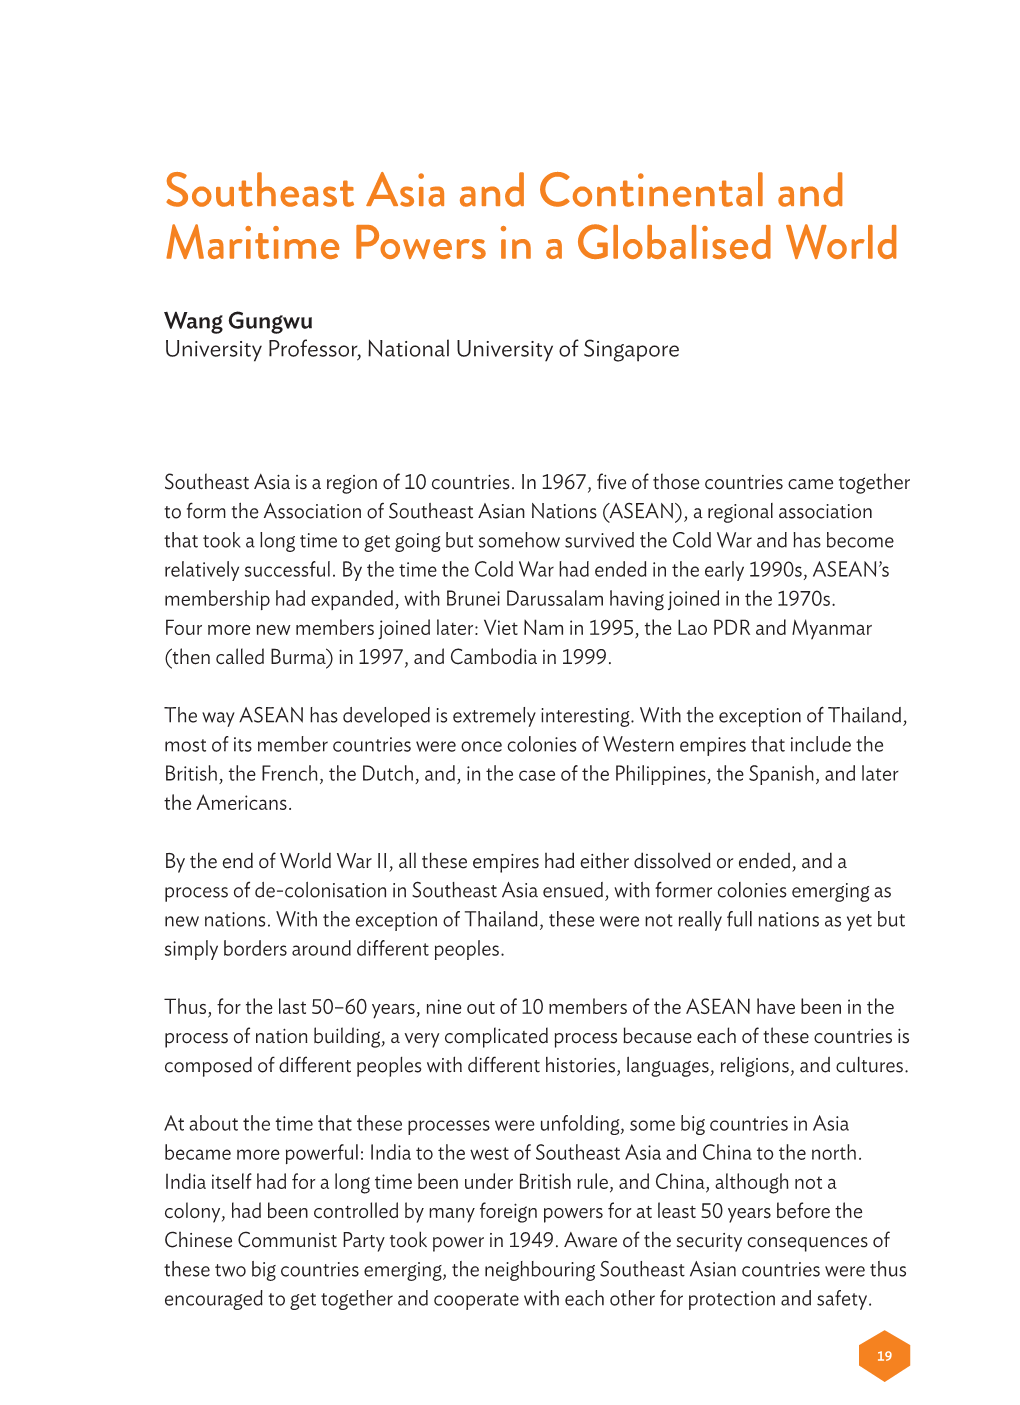 Southeast Asia and Continental and Maritime Powers in a Globalised World